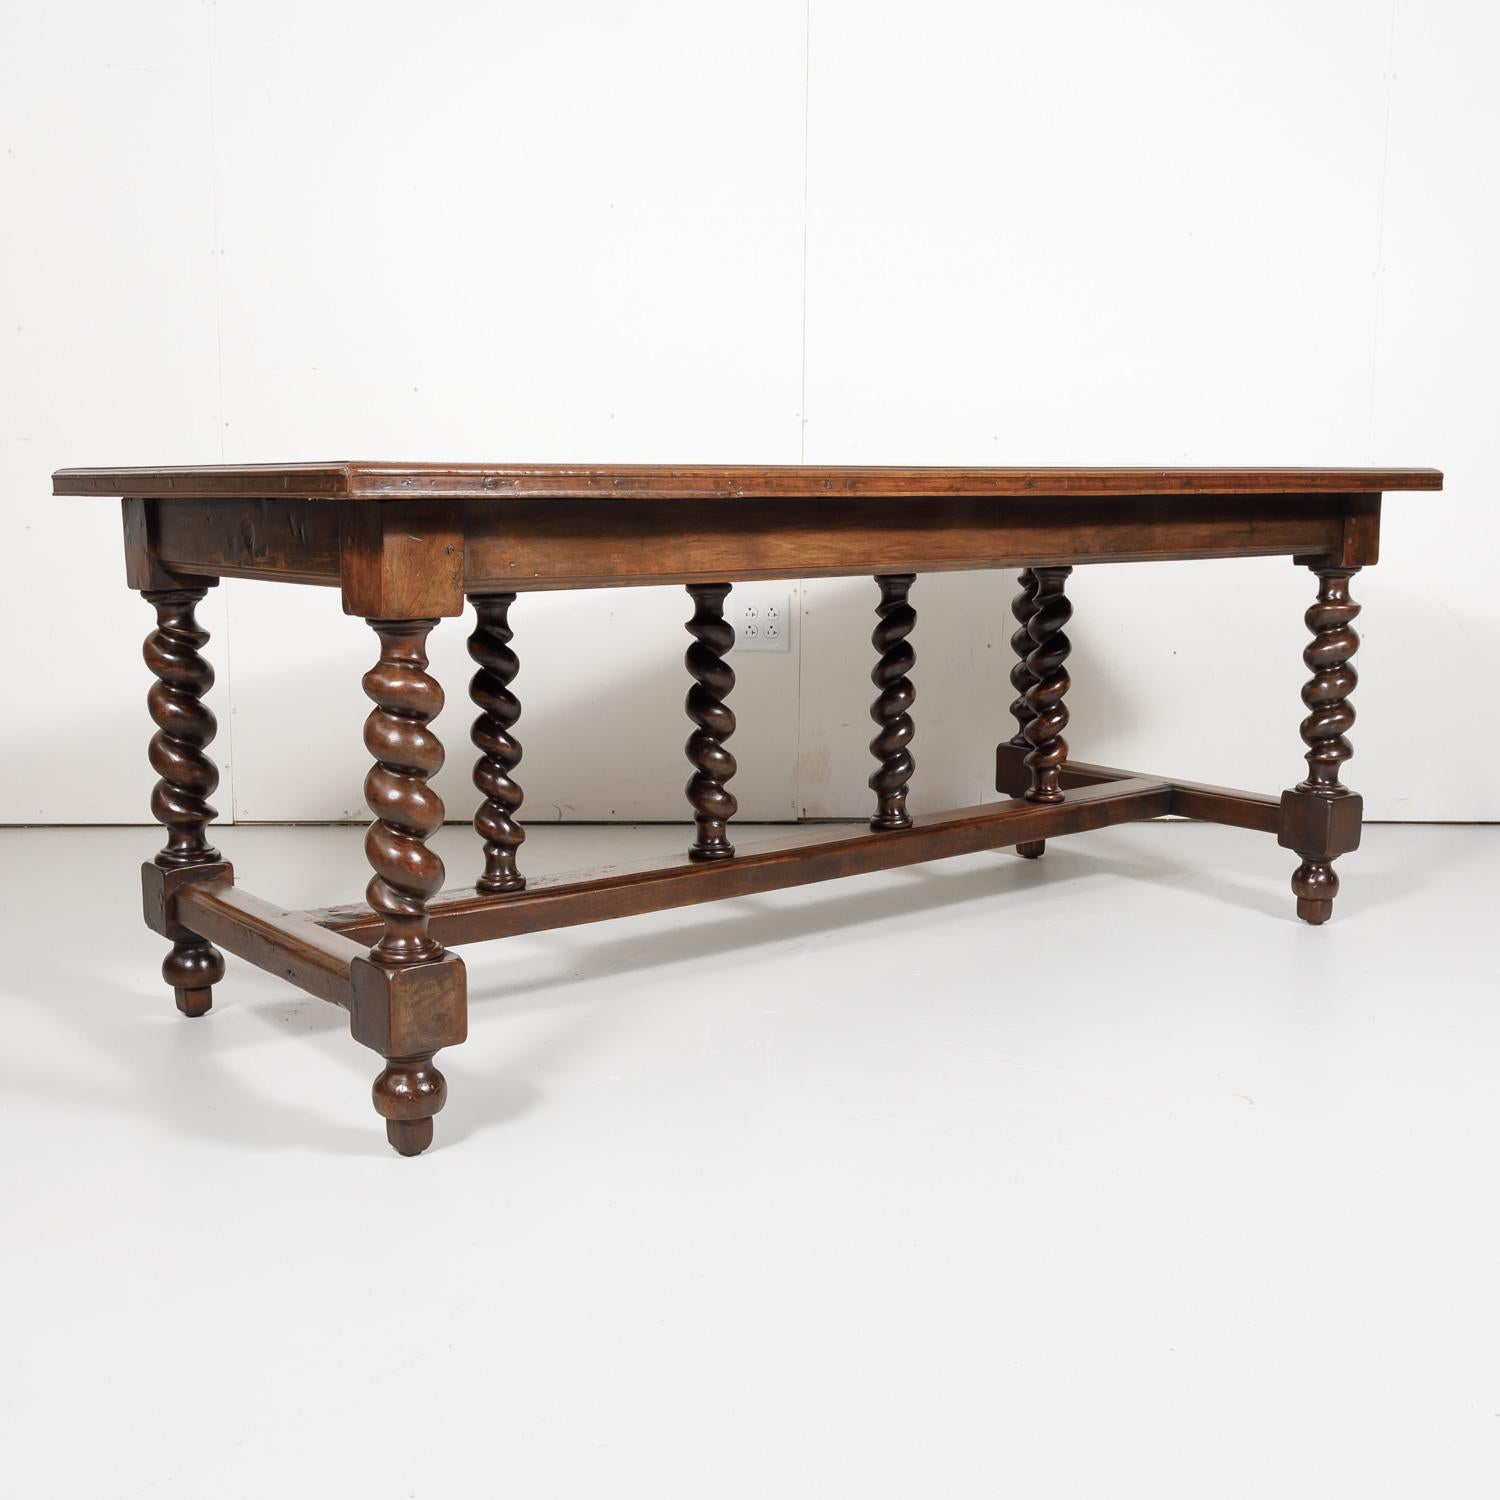 19th century French Louis XIII style barley twist farm table handcrafted in Lyon of solid walnut, circa 1890s. This handsome table has a rectangular inset plank top raised on four barley twist legs joined by an H-stretcher with three vertical barley